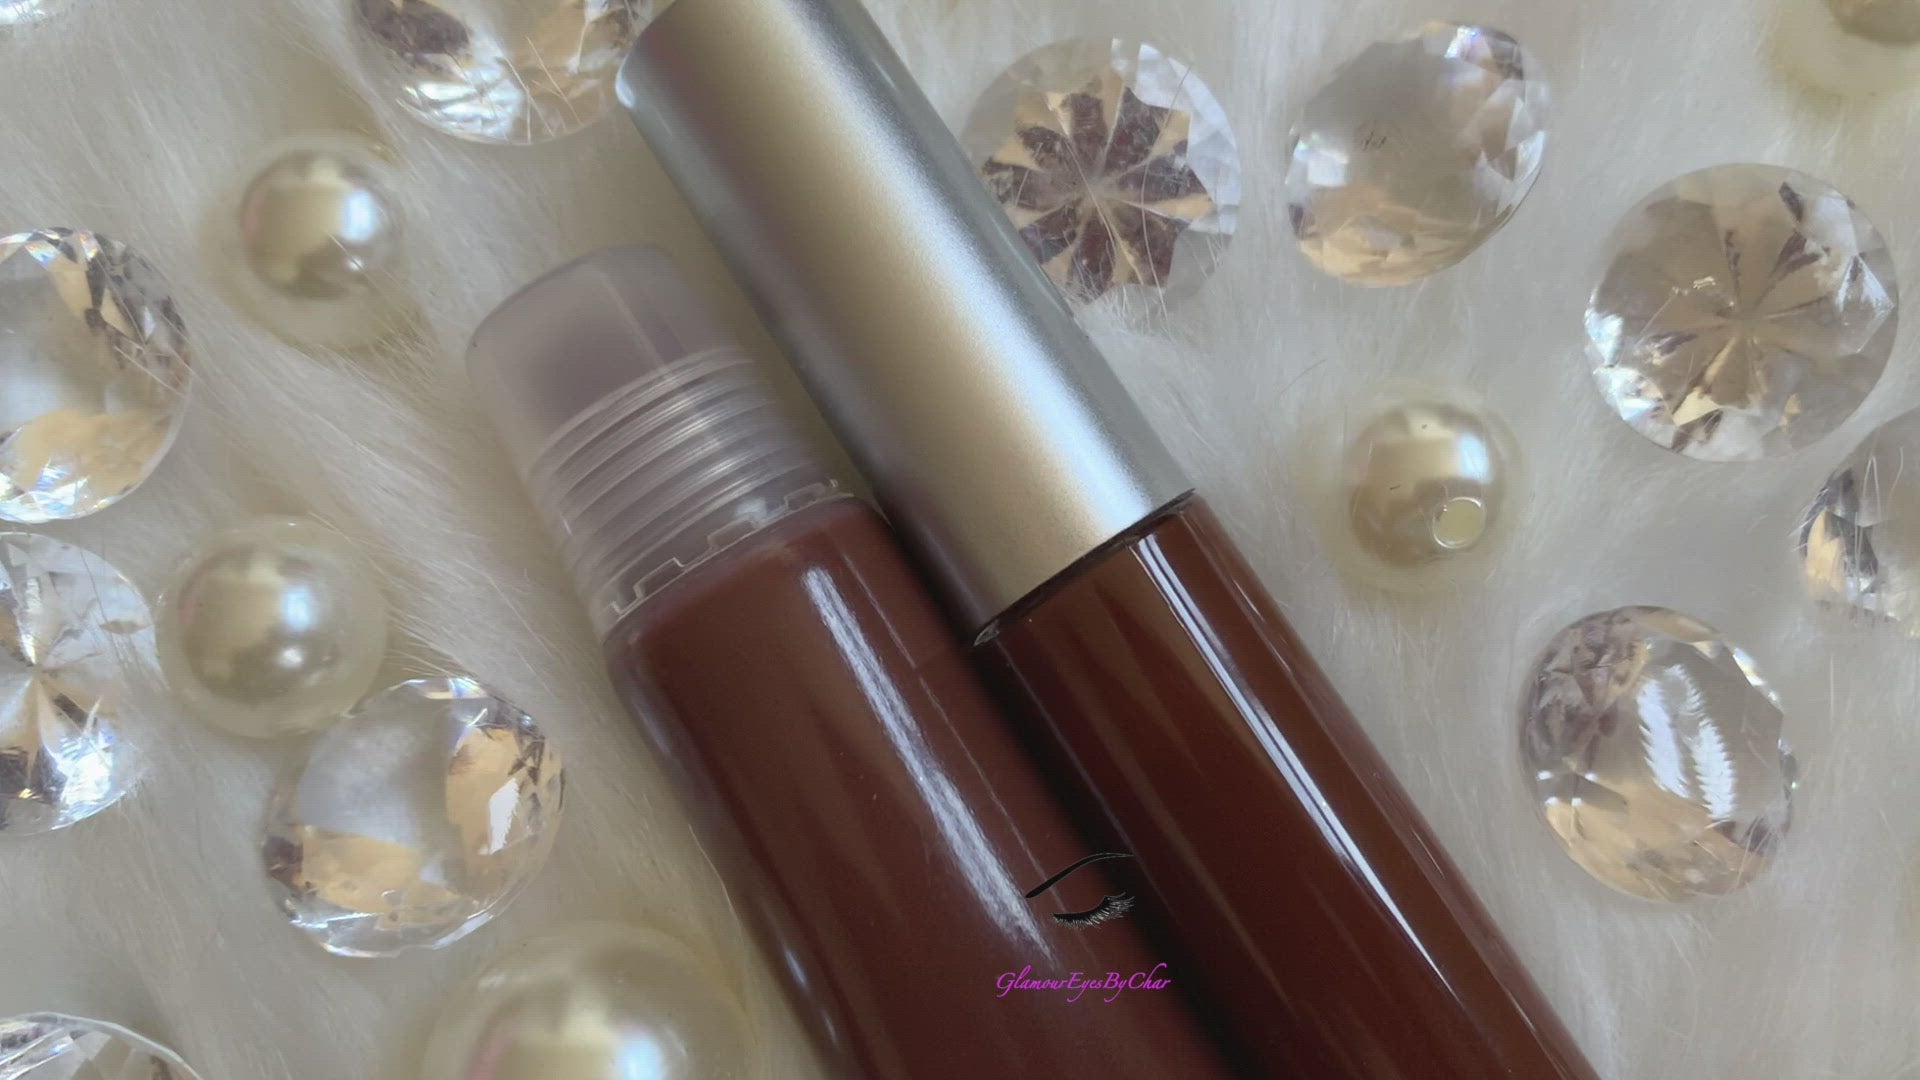 Jakki is a gorgeous chocolate brown hydrating gloss. This gloss is also vegan, gluten-free, high shine, smooth and long lasting. It's made with premium rich ingredients to keep your lips soft, moisturized and luscious without feeling sticky. Jakki is available in a squeeze tube and a wand tube (doe foot applicator) for a more precise application.